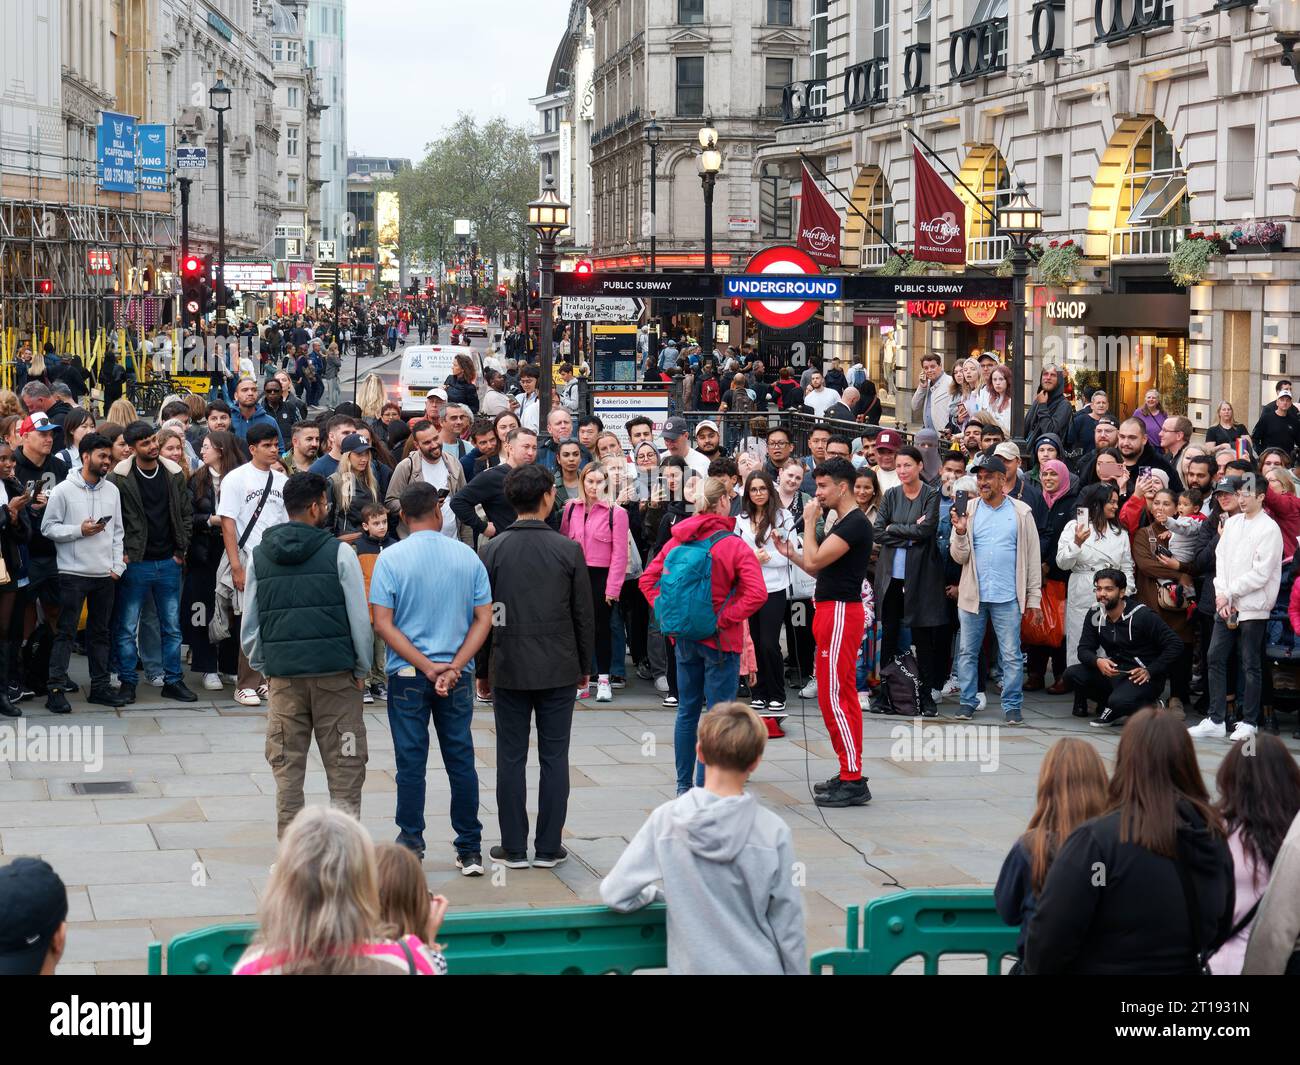 A street performer entertains a crowd of people mostly tourists in Piccadilly Circus London Stock Photo